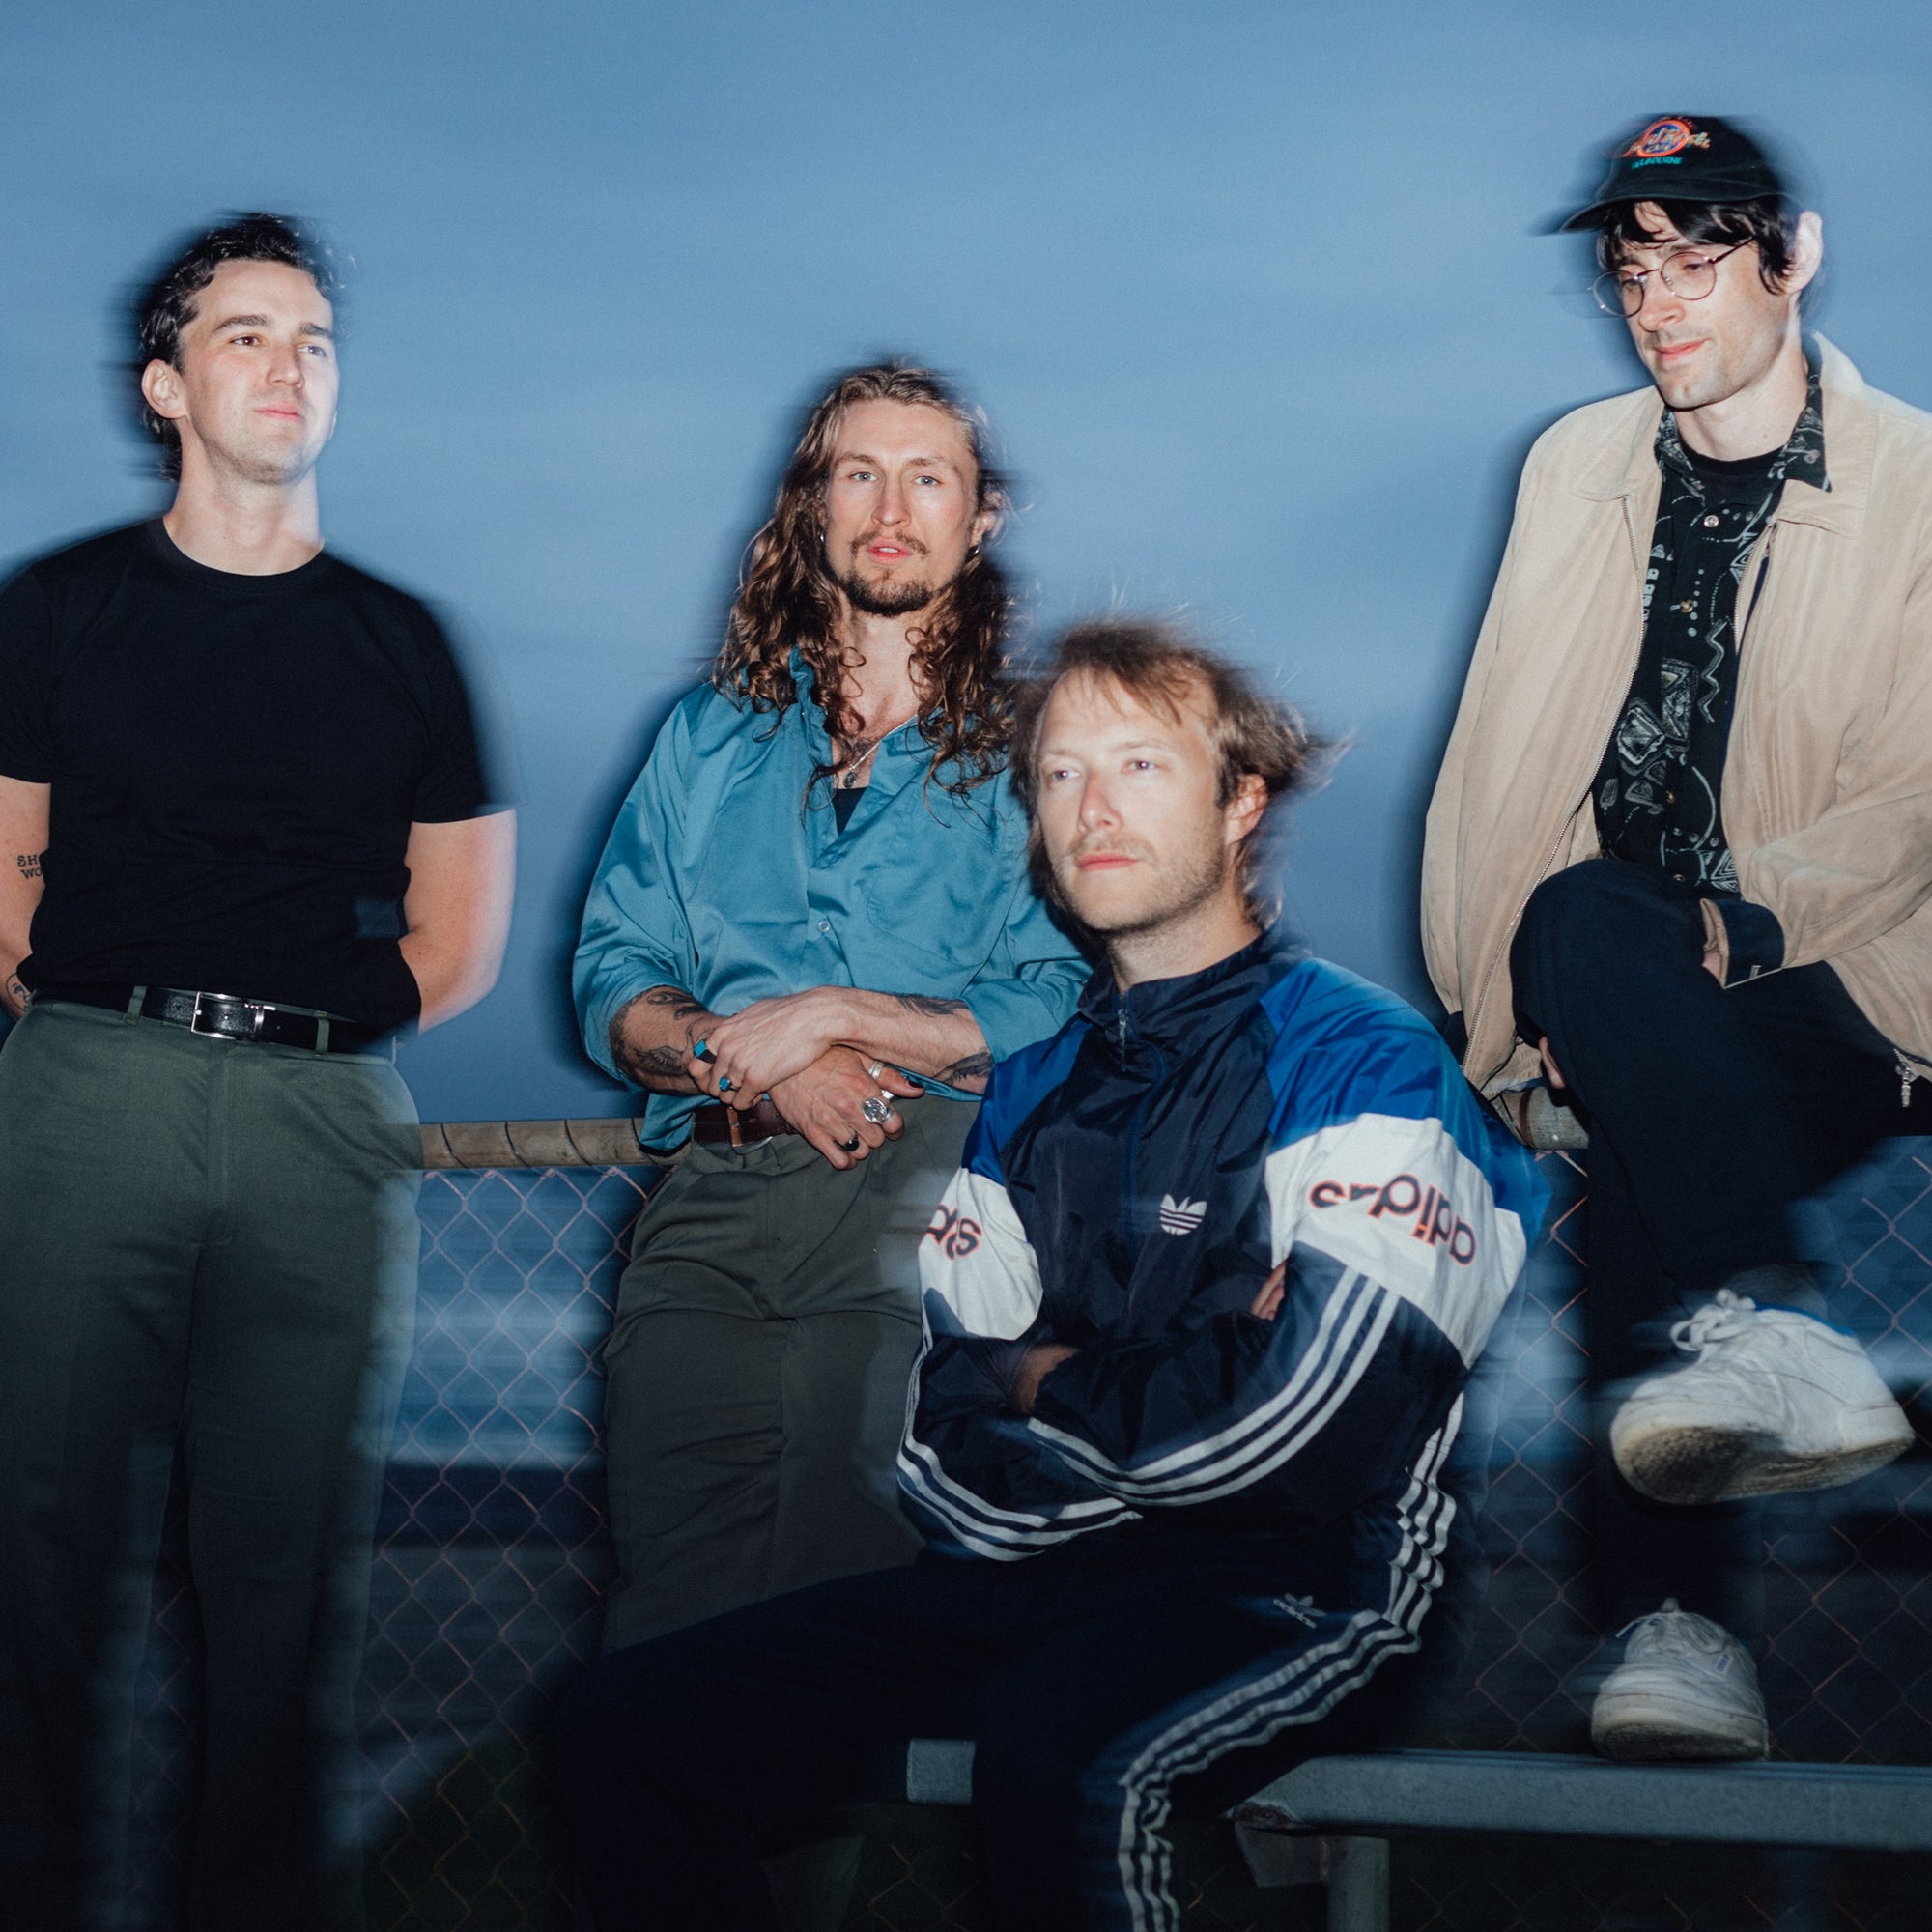 Melbourne's Favoured State Unleash Scorching Post-Punk Anthem 'Look Who's Talking'